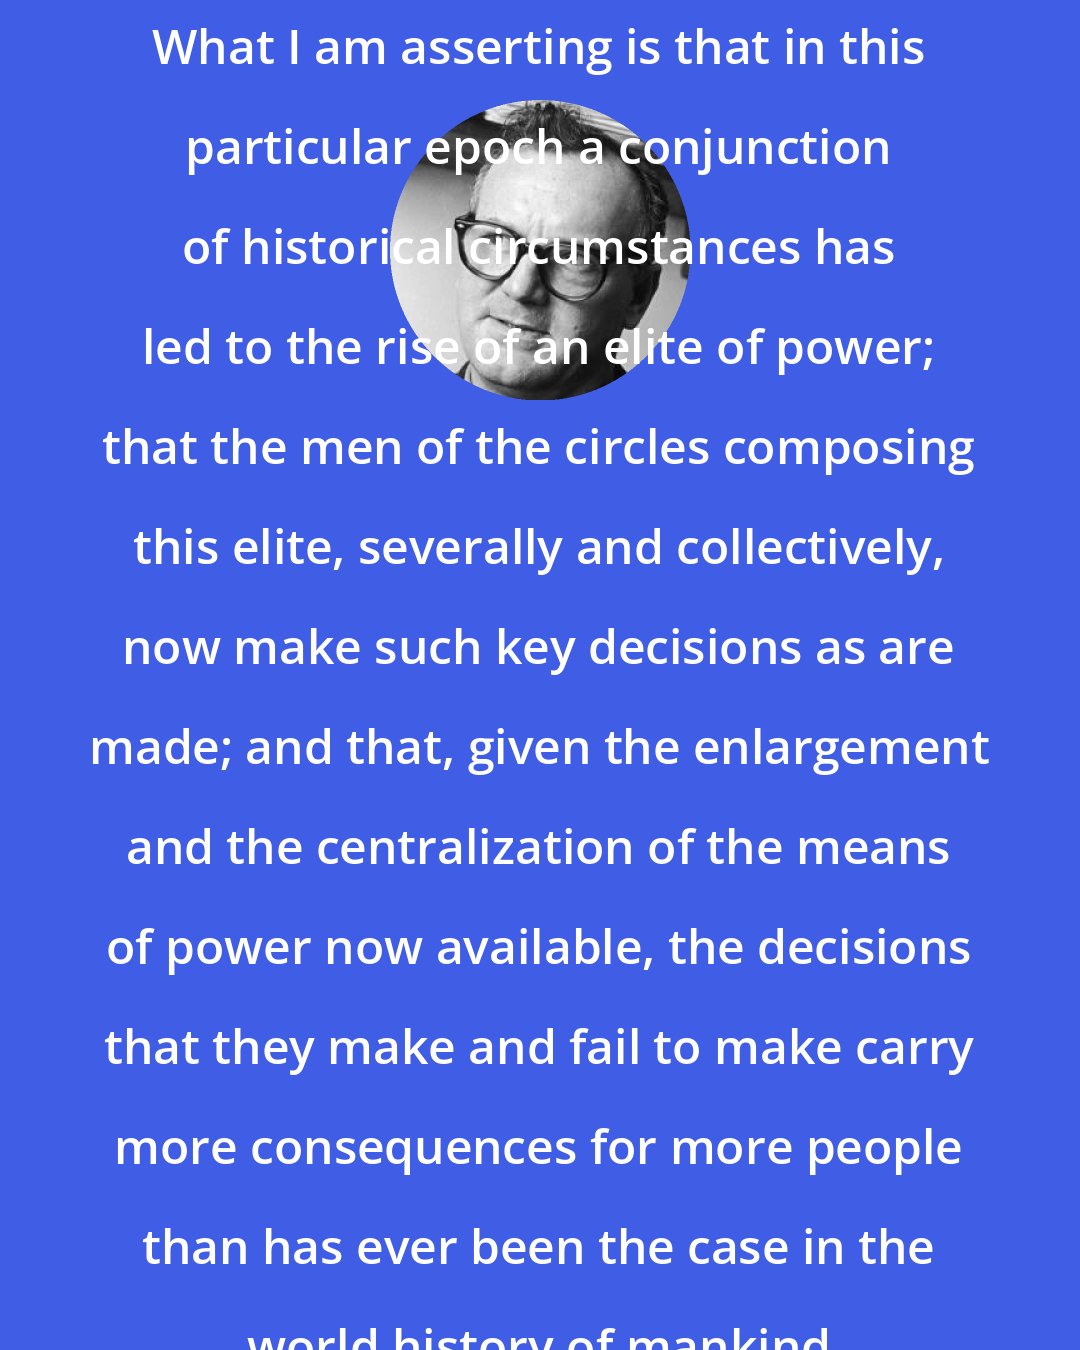 C. Wright Mills: What I am asserting is that in this particular epoch a conjunction of historical circumstances has led to the rise of an elite of power; that the men of the circles composing this elite, severally and collectively, now make such key decisions as are made; and that, given the enlargement and the centralization of the means of power now available, the decisions that they make and fail to make carry more consequences for more people than has ever been the case in the world history of mankind